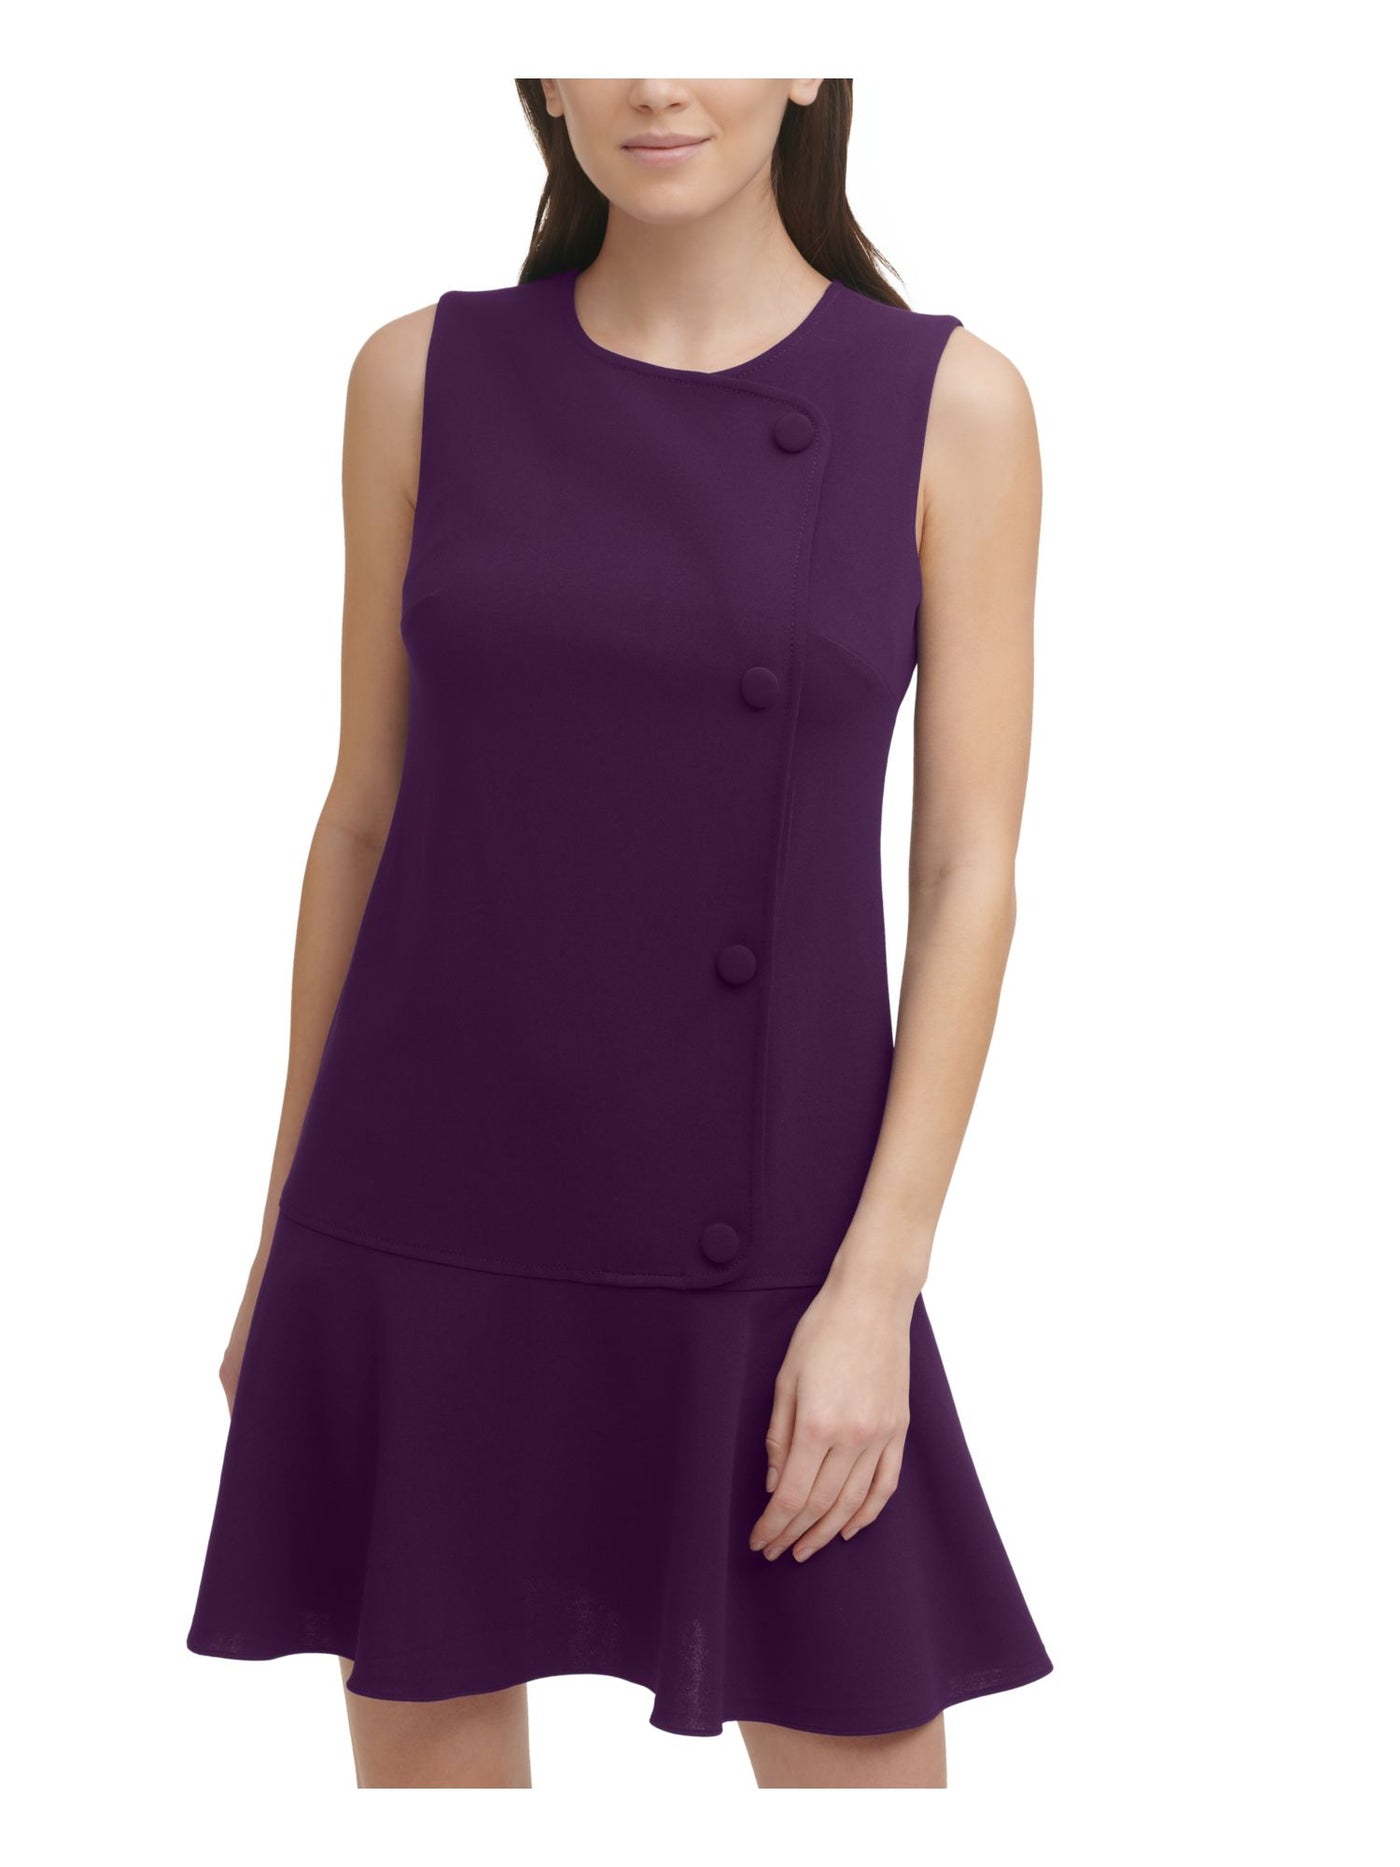 DKNY Womens Purple Stretch Zippered Fitted Faux Button Sleeveless Round Neck Short Wear To Work Drop Waist Dress 12